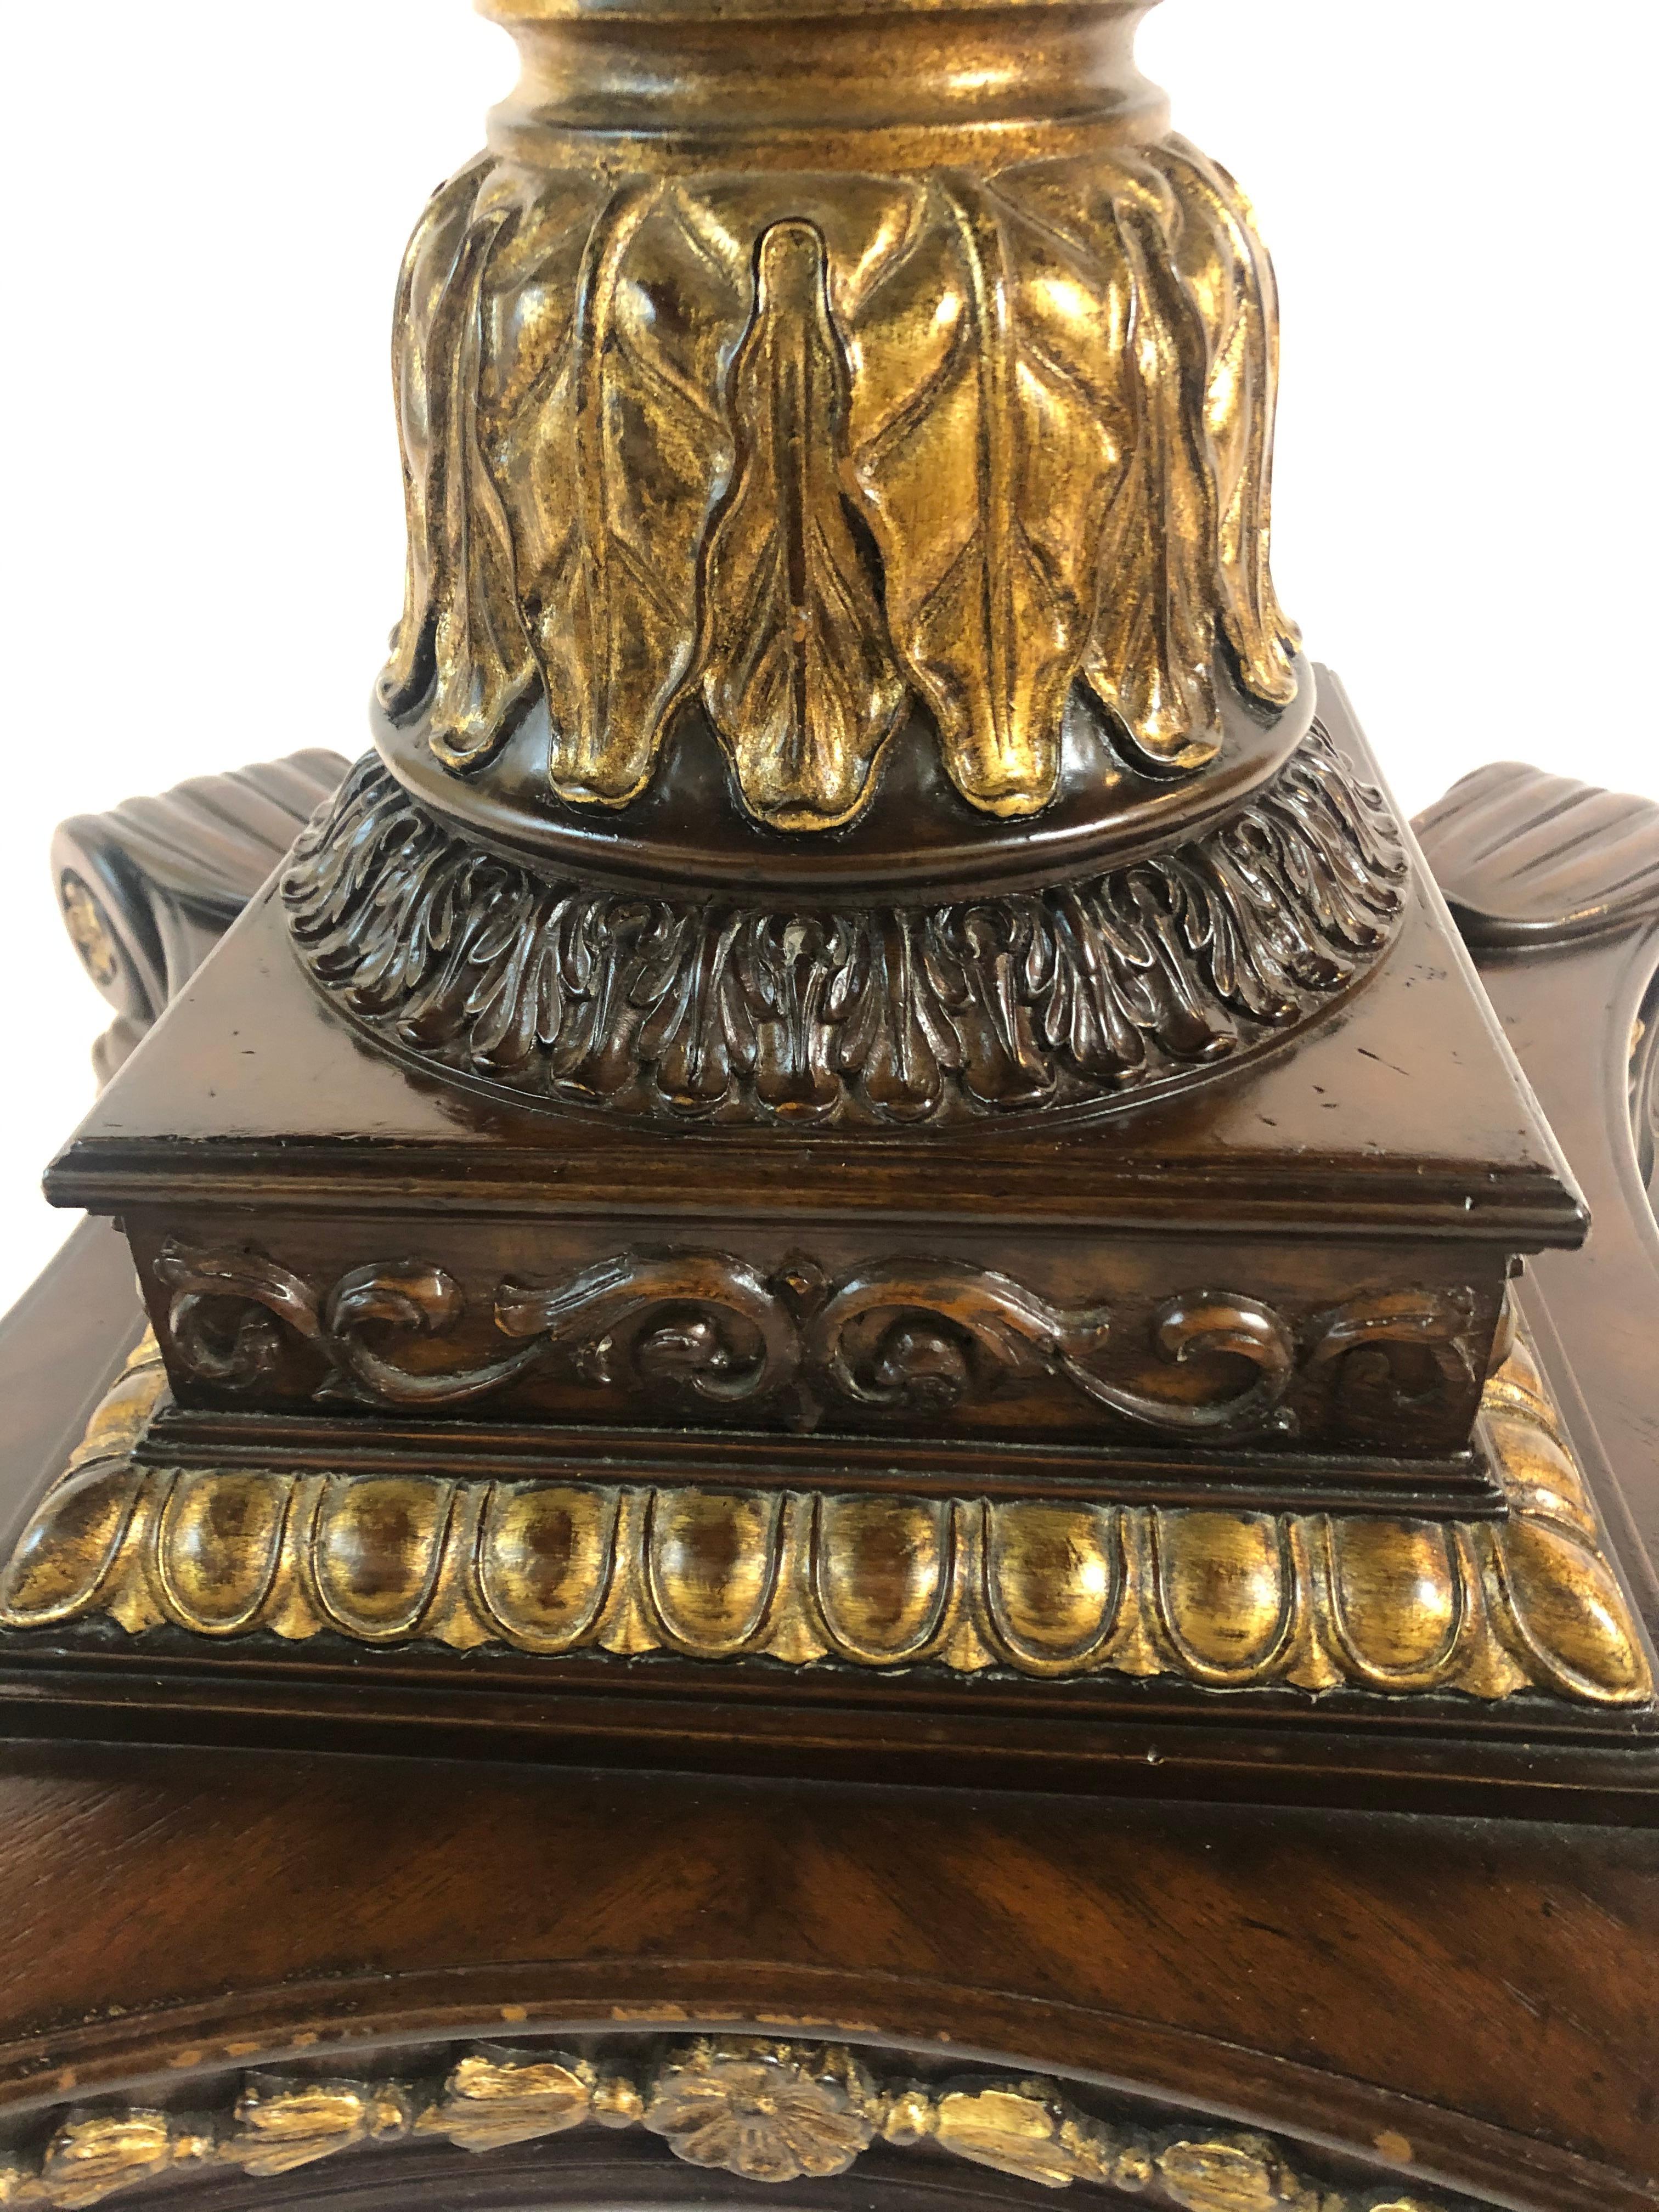 Sublime round center table having ornate mixed wood inlaid top and fancy carved wood and gilded pedestal on impressive base with four handsome paw feet. A lovely gilded edge is on the periphery of the table.
Apron 28.75 H
Top comes off for